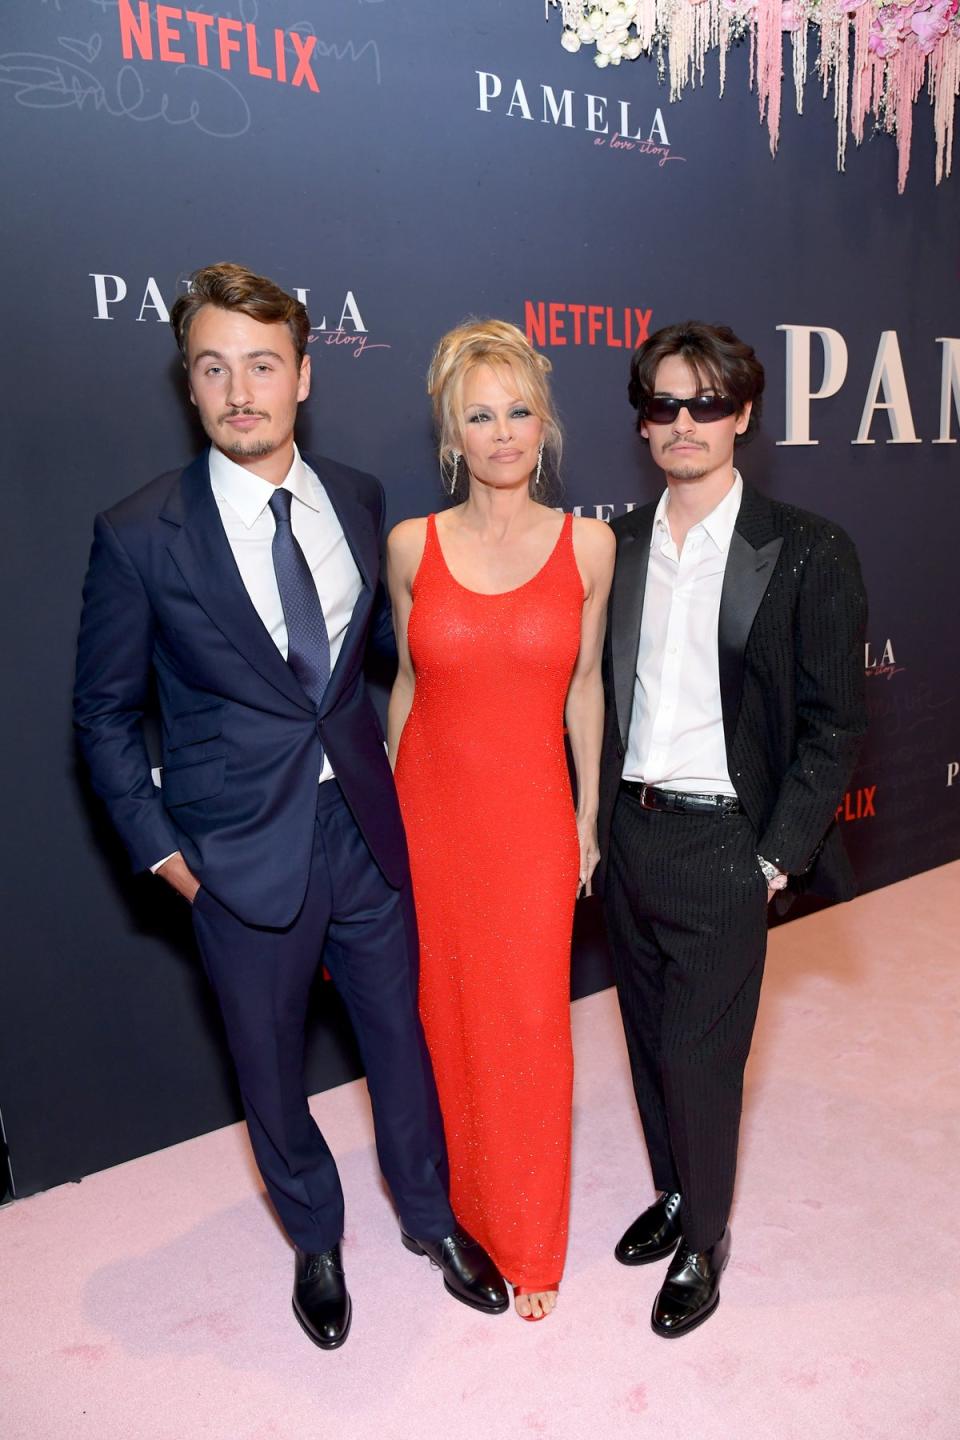 At the premiere of Pamela, a love story, with sons Brandon and Dylan (Charley Gallay / Getty Images for Netflix)